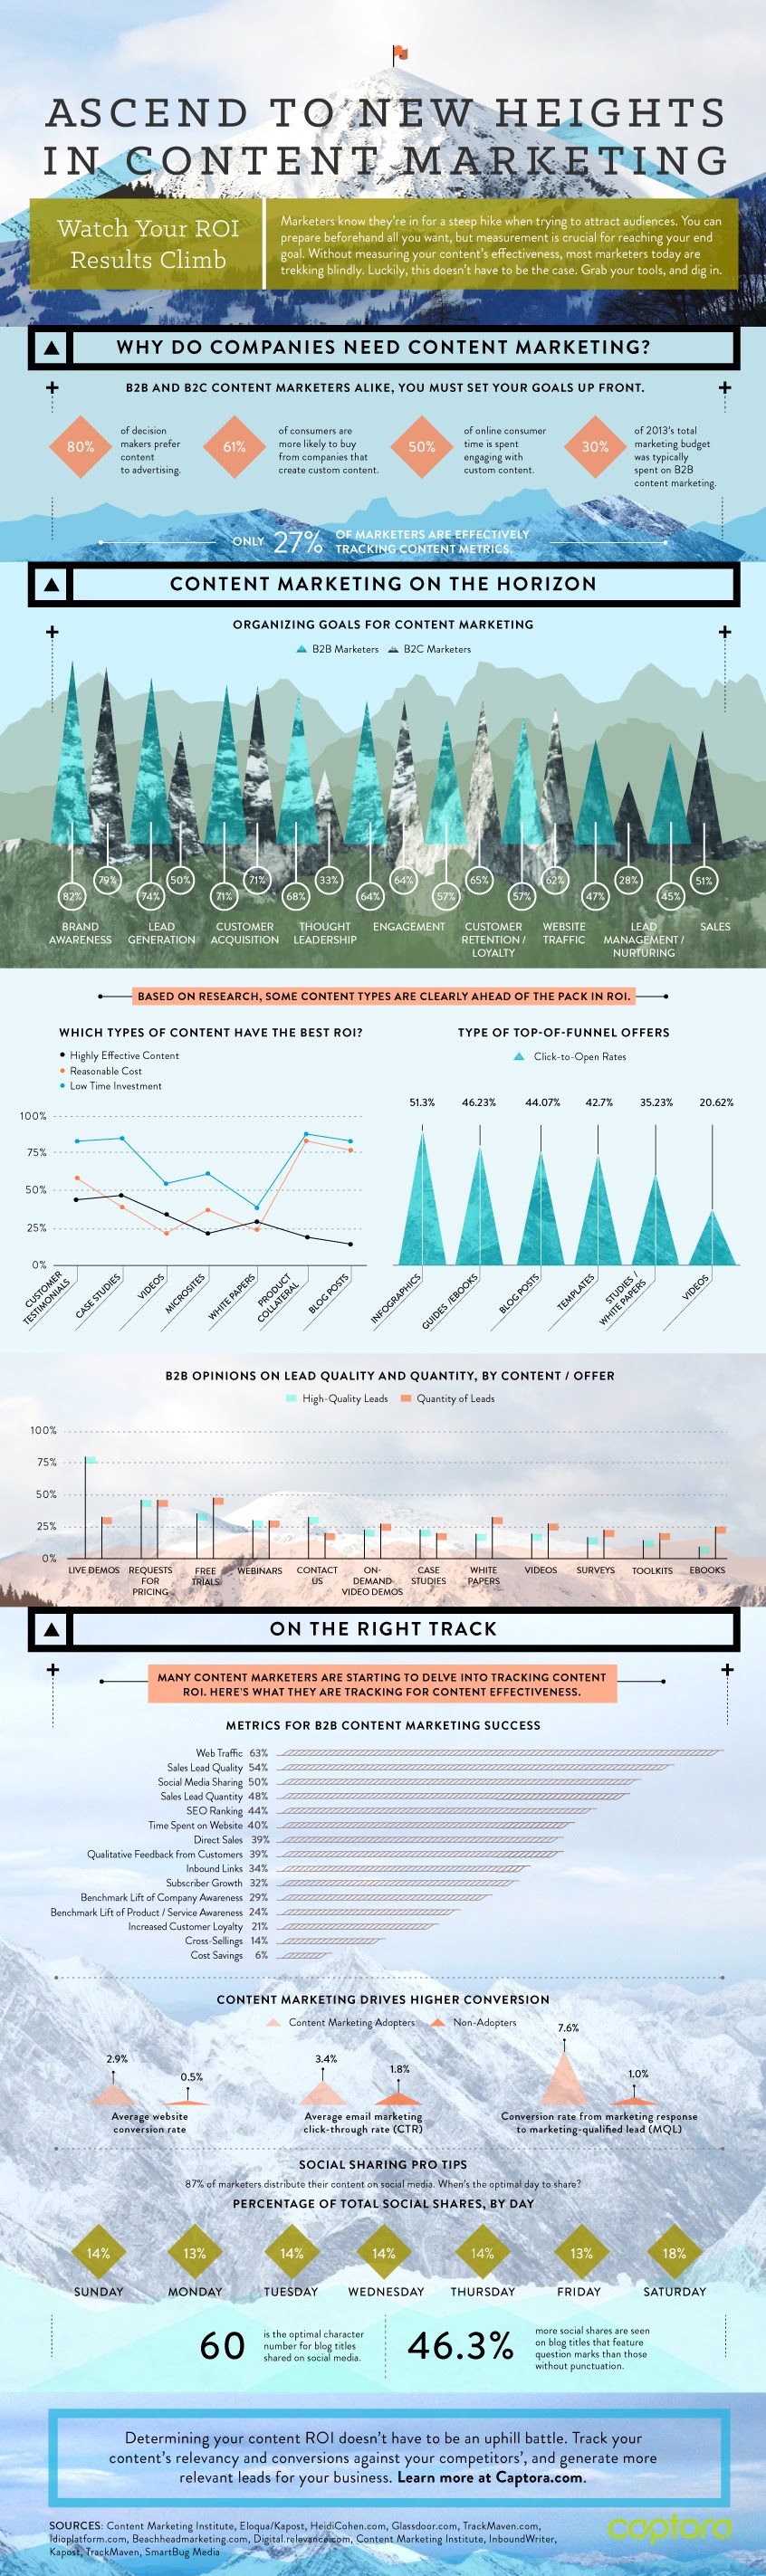 Ascend To New Heights In Content Marketing #infographic